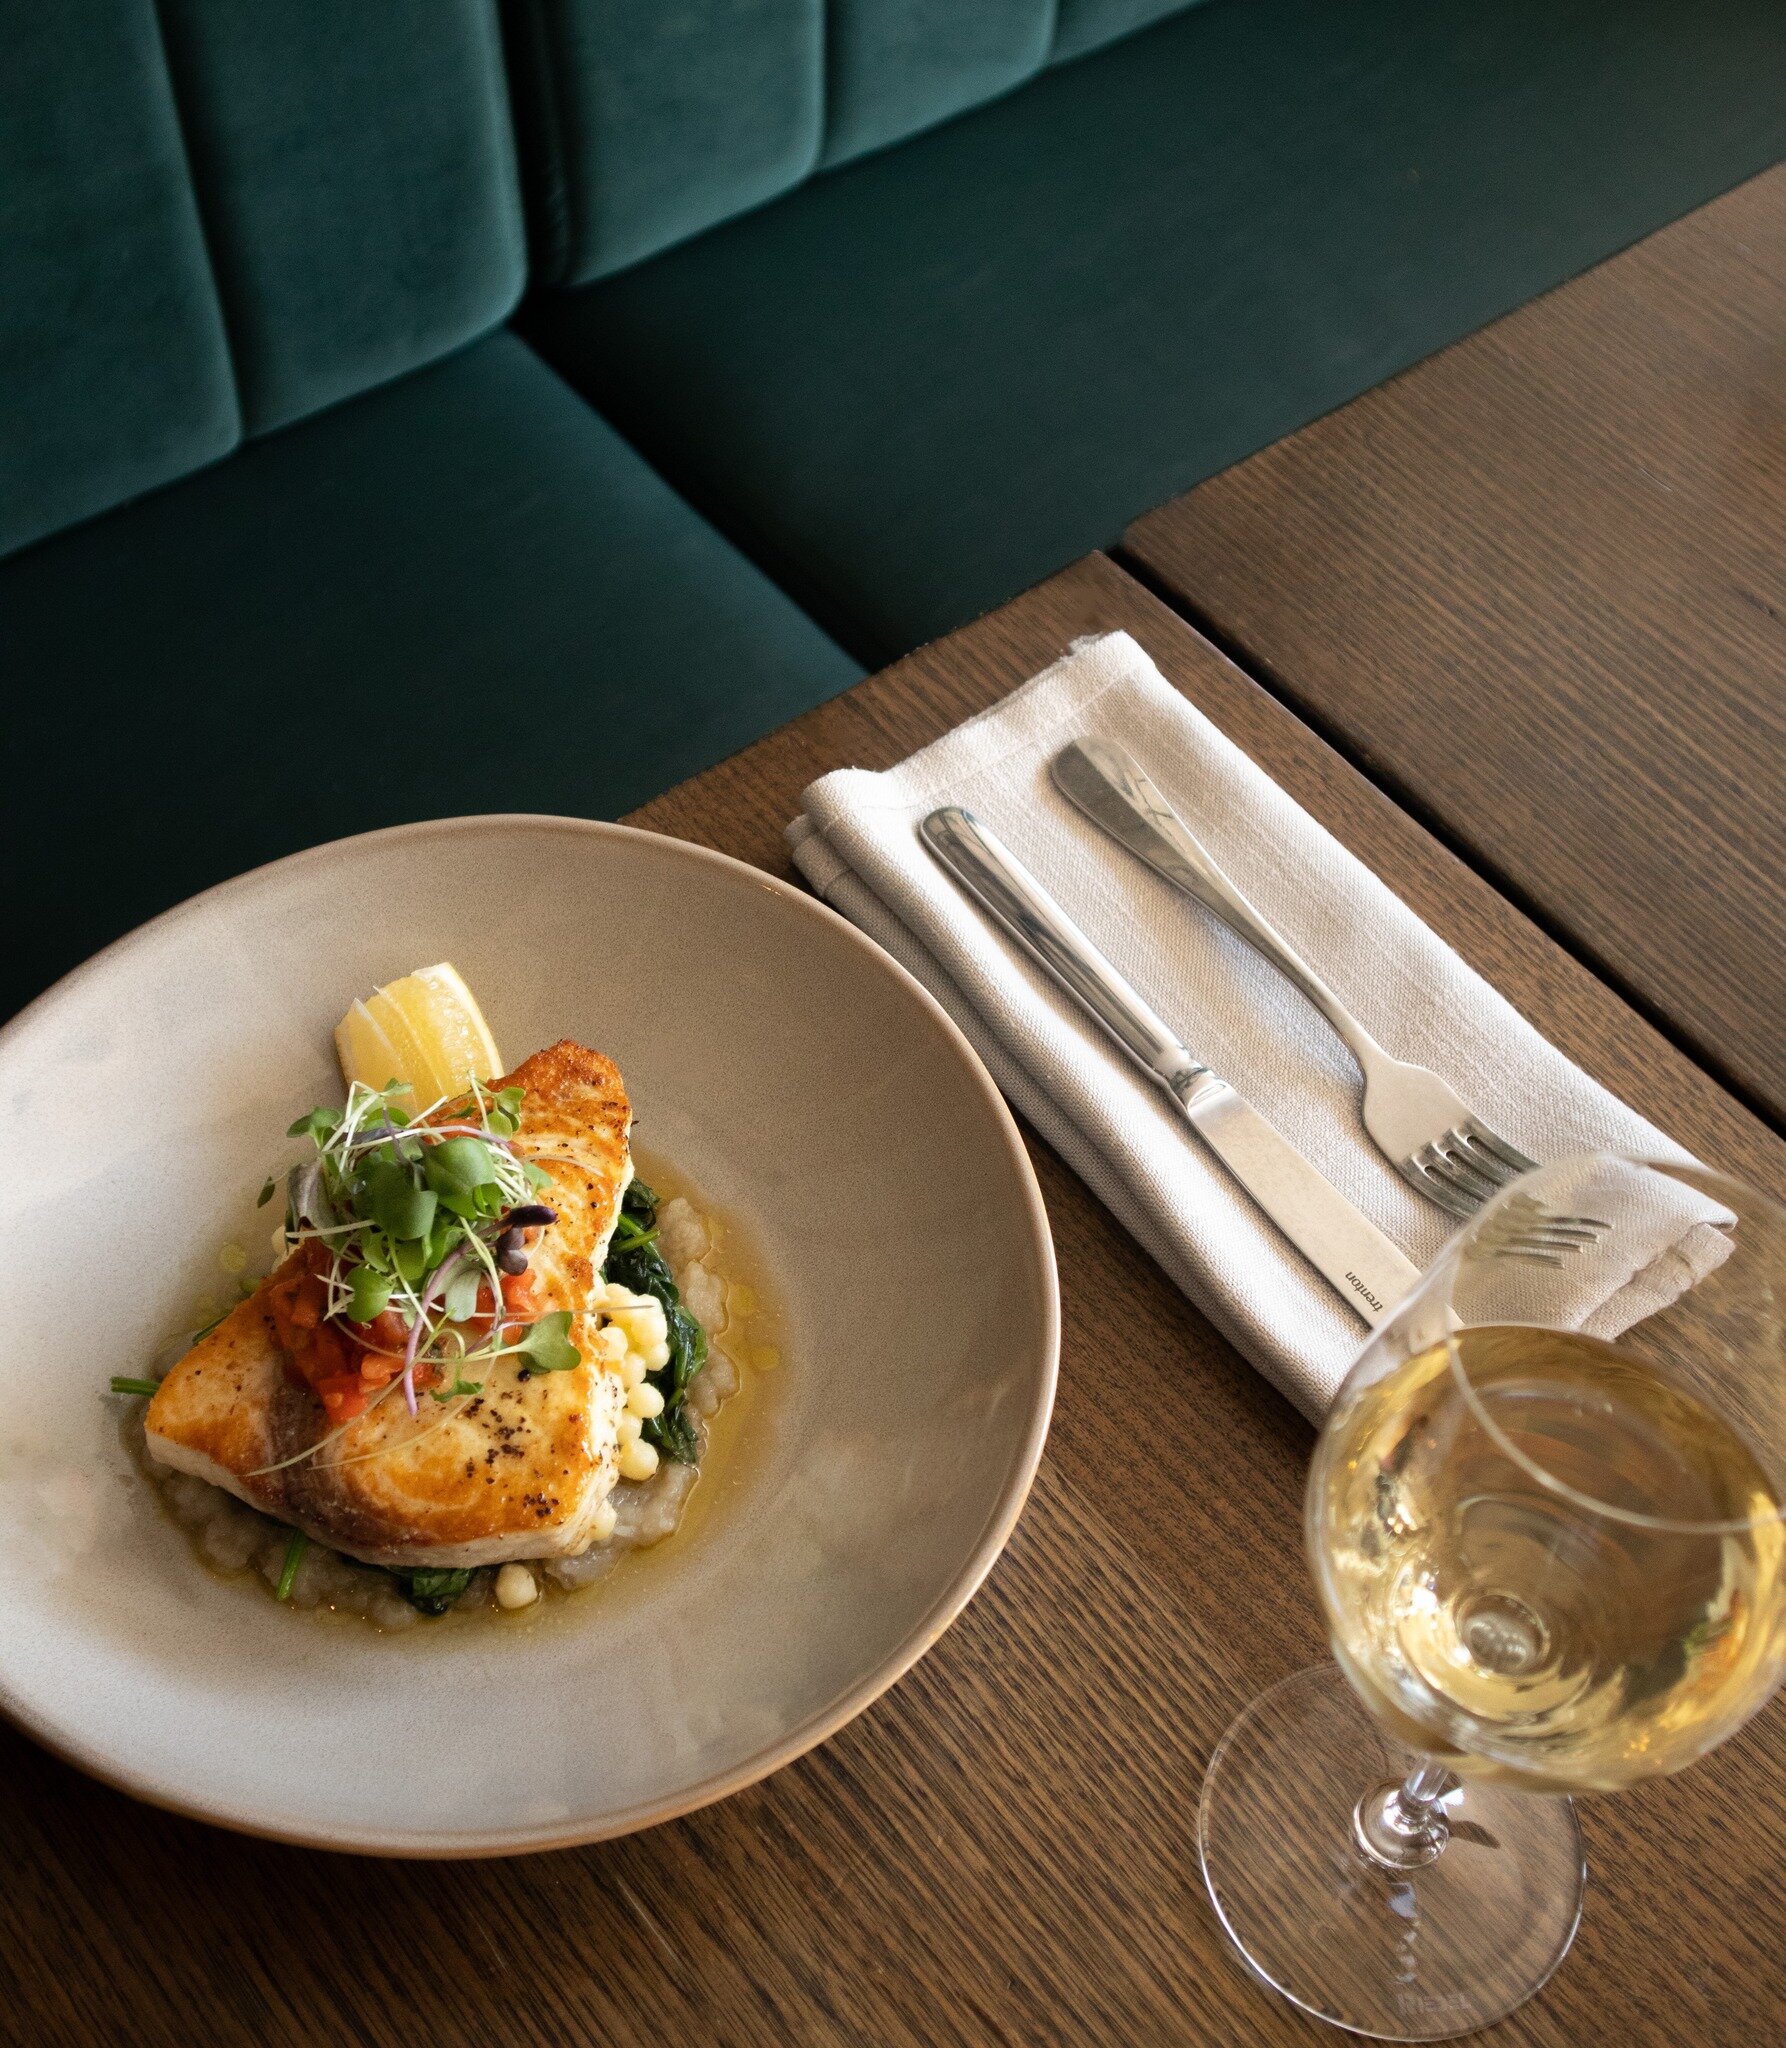 Have you booked your table for Valentine's Day? Our Chefs' have created a menu that is sure to impress you and your loved ones! Book now to have a taste of our Valentine's Chefs specials!

Pictured is our  Cape York Peninsula swordfish steak with Jer